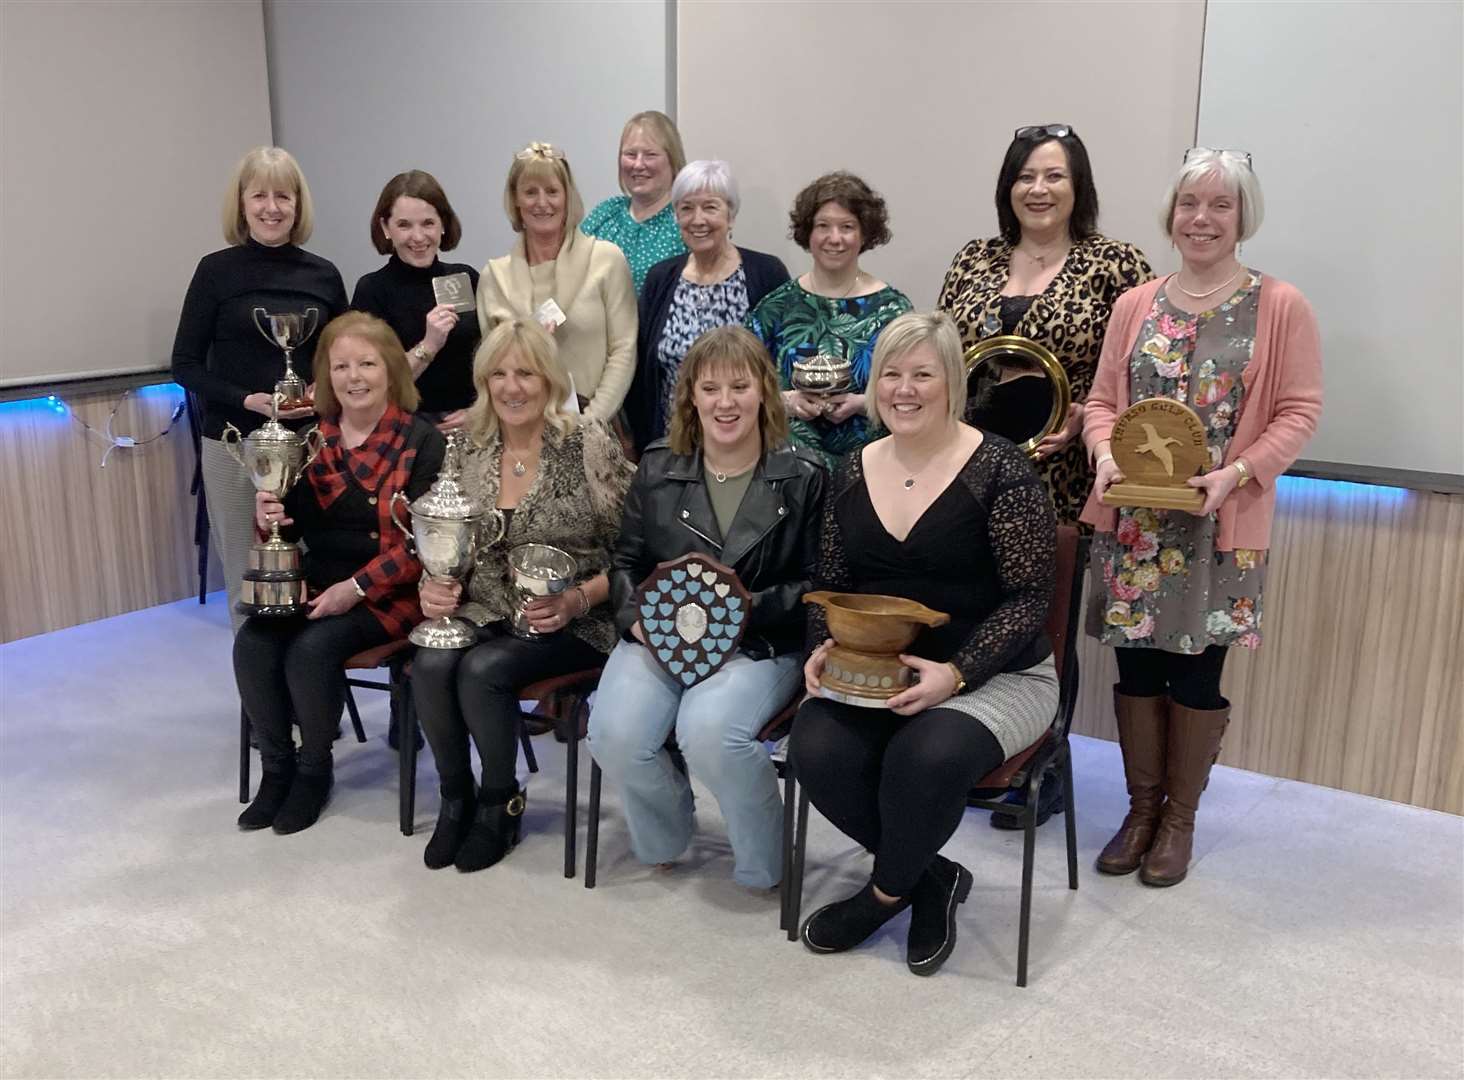 Members of the ladies' section at Thurso Golf Club had their 2023 prize-giving presentations at a Burns supper following their annual general meeting. The presentations were made by the retiring ladies' captain, Alison Campbell.